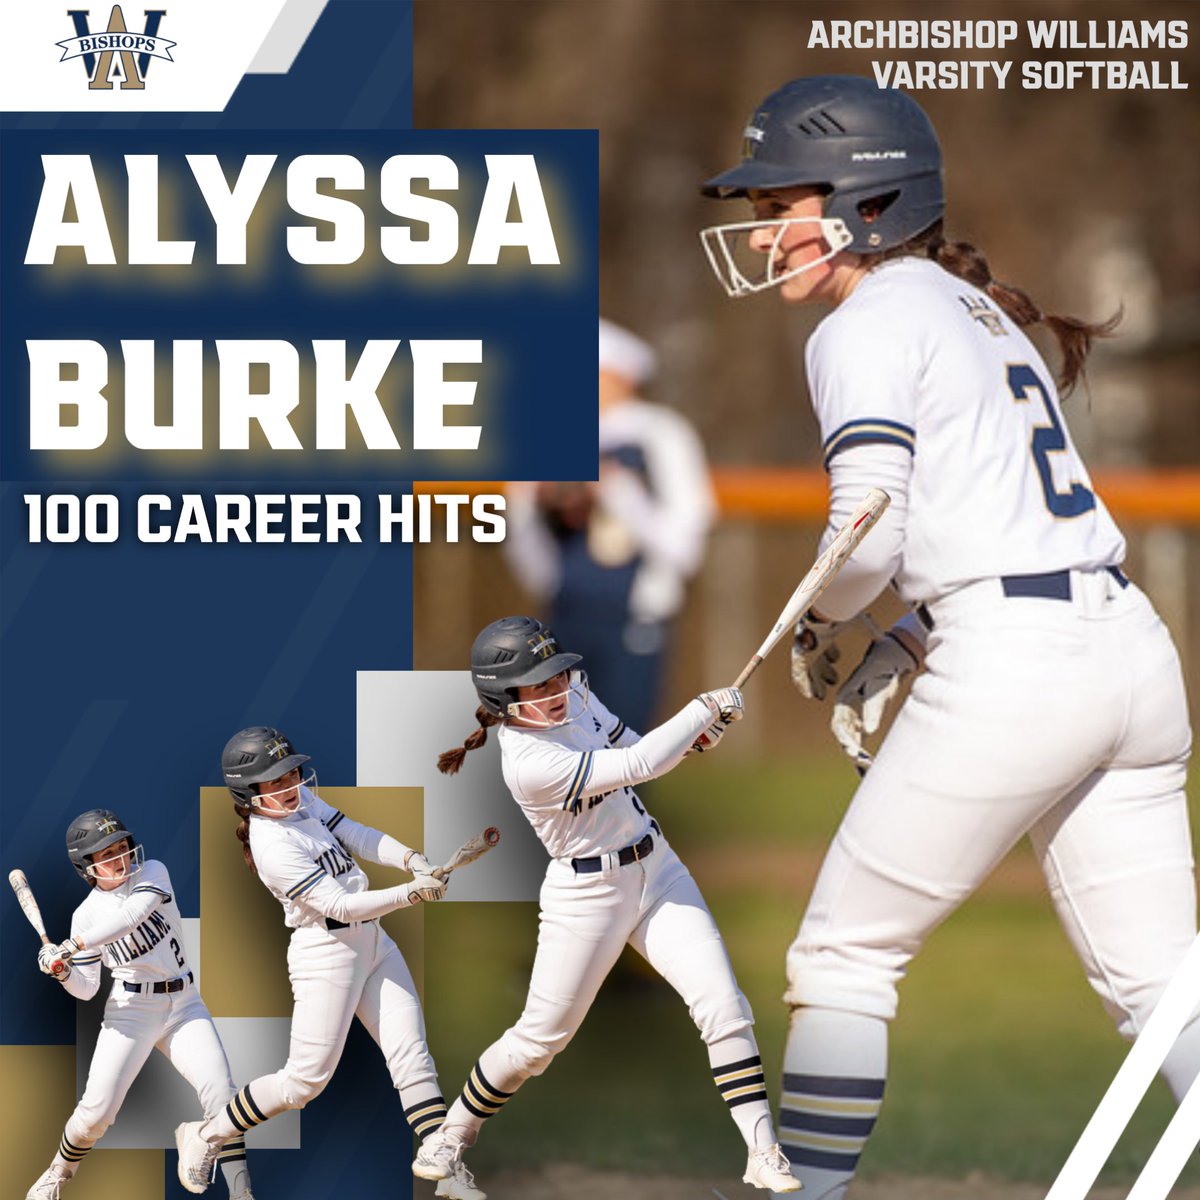 SOFTBALL: Congratulations to Senior Captain Alyssa Burke on surpassing 100 career hits with todays win over Spellman! The lead off hitter accomplished this in only two and a half years! Way to go Alyssa! #rollbills @bishopssoftball